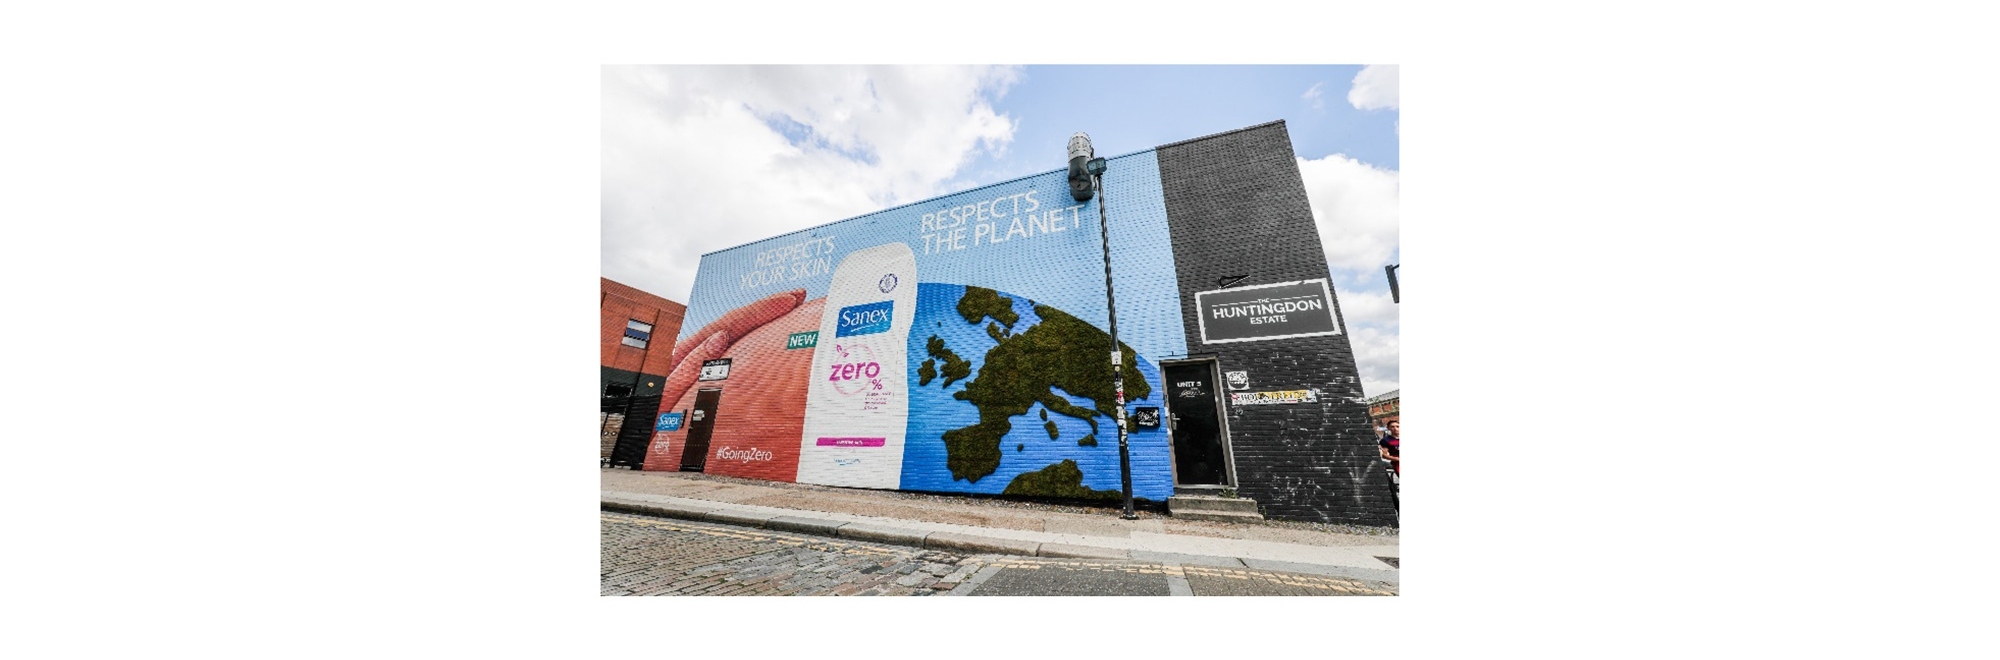 Specialist out-of-home agency Kinetic creates 'living mural' for Sanex's launch of 99% biodegradable Zero% shower gel